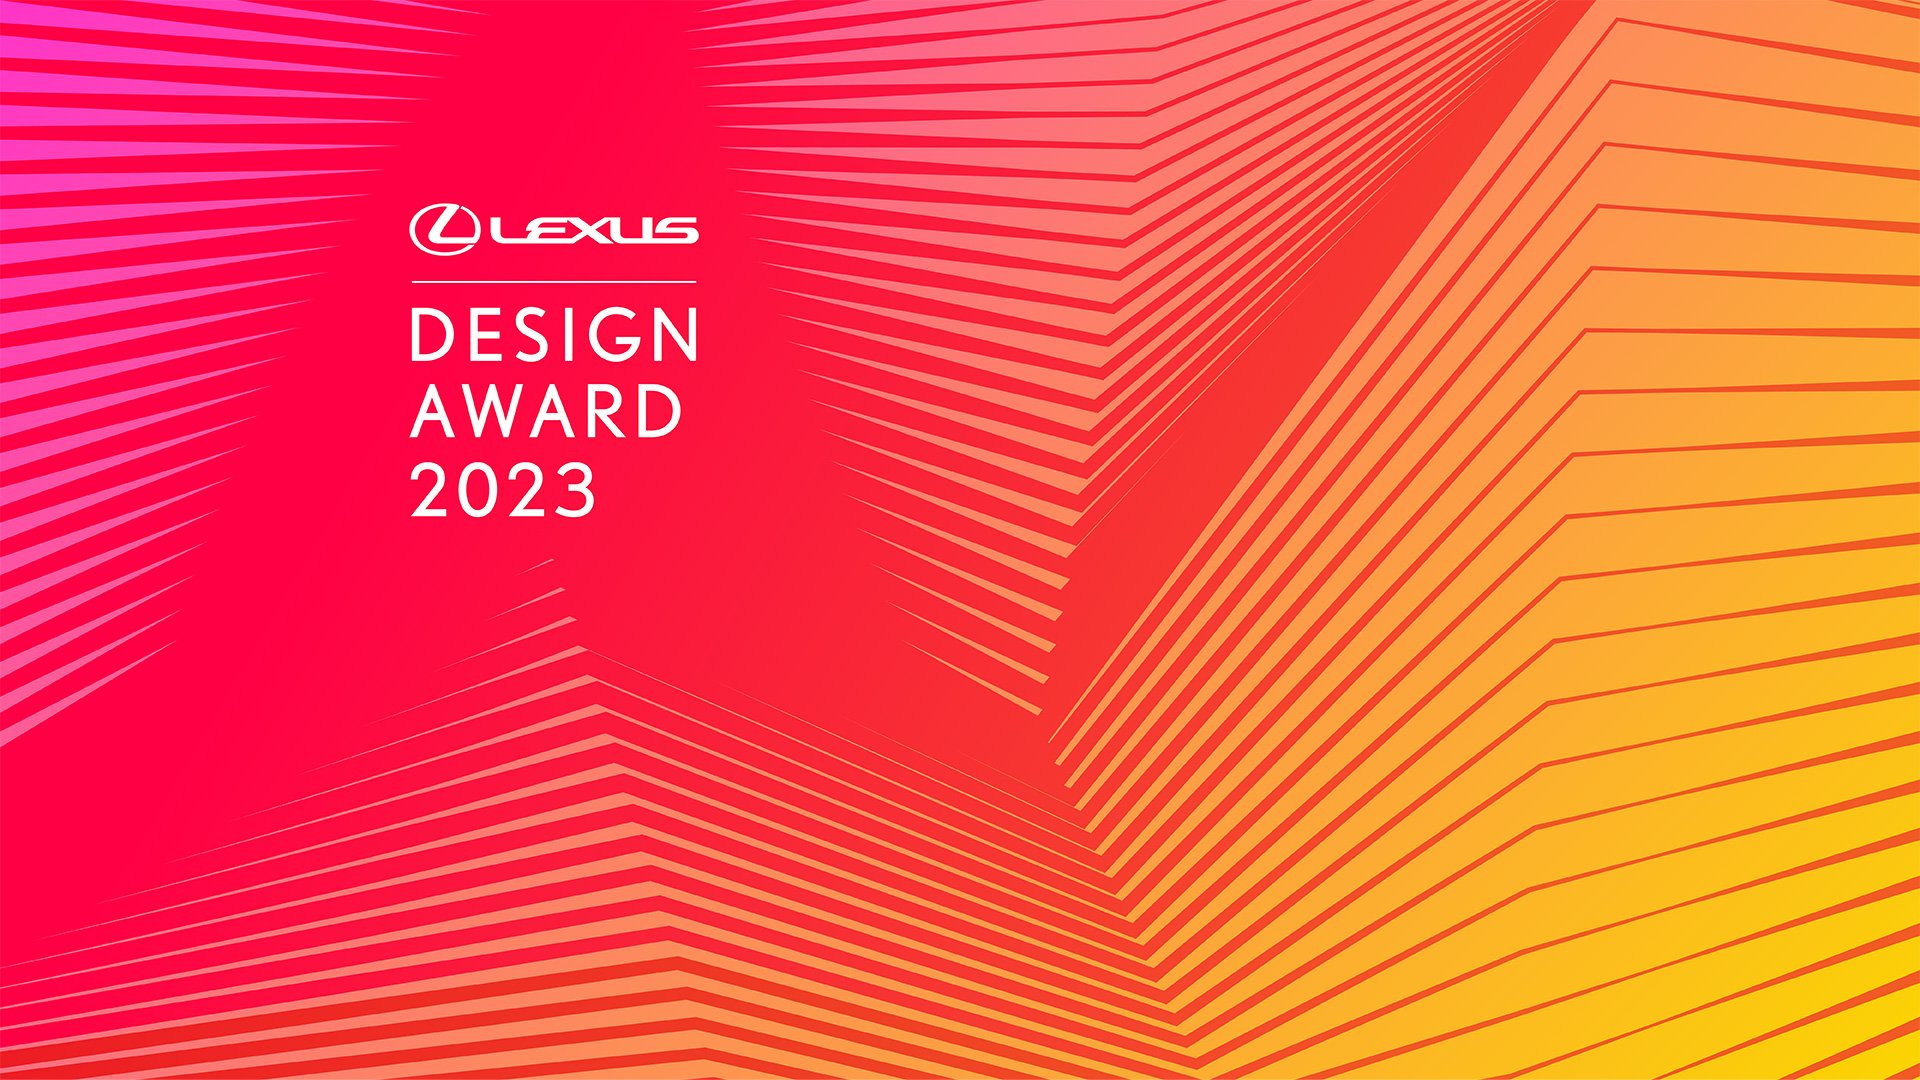 Lexus Design Award 2023 Continues to Accept Applications